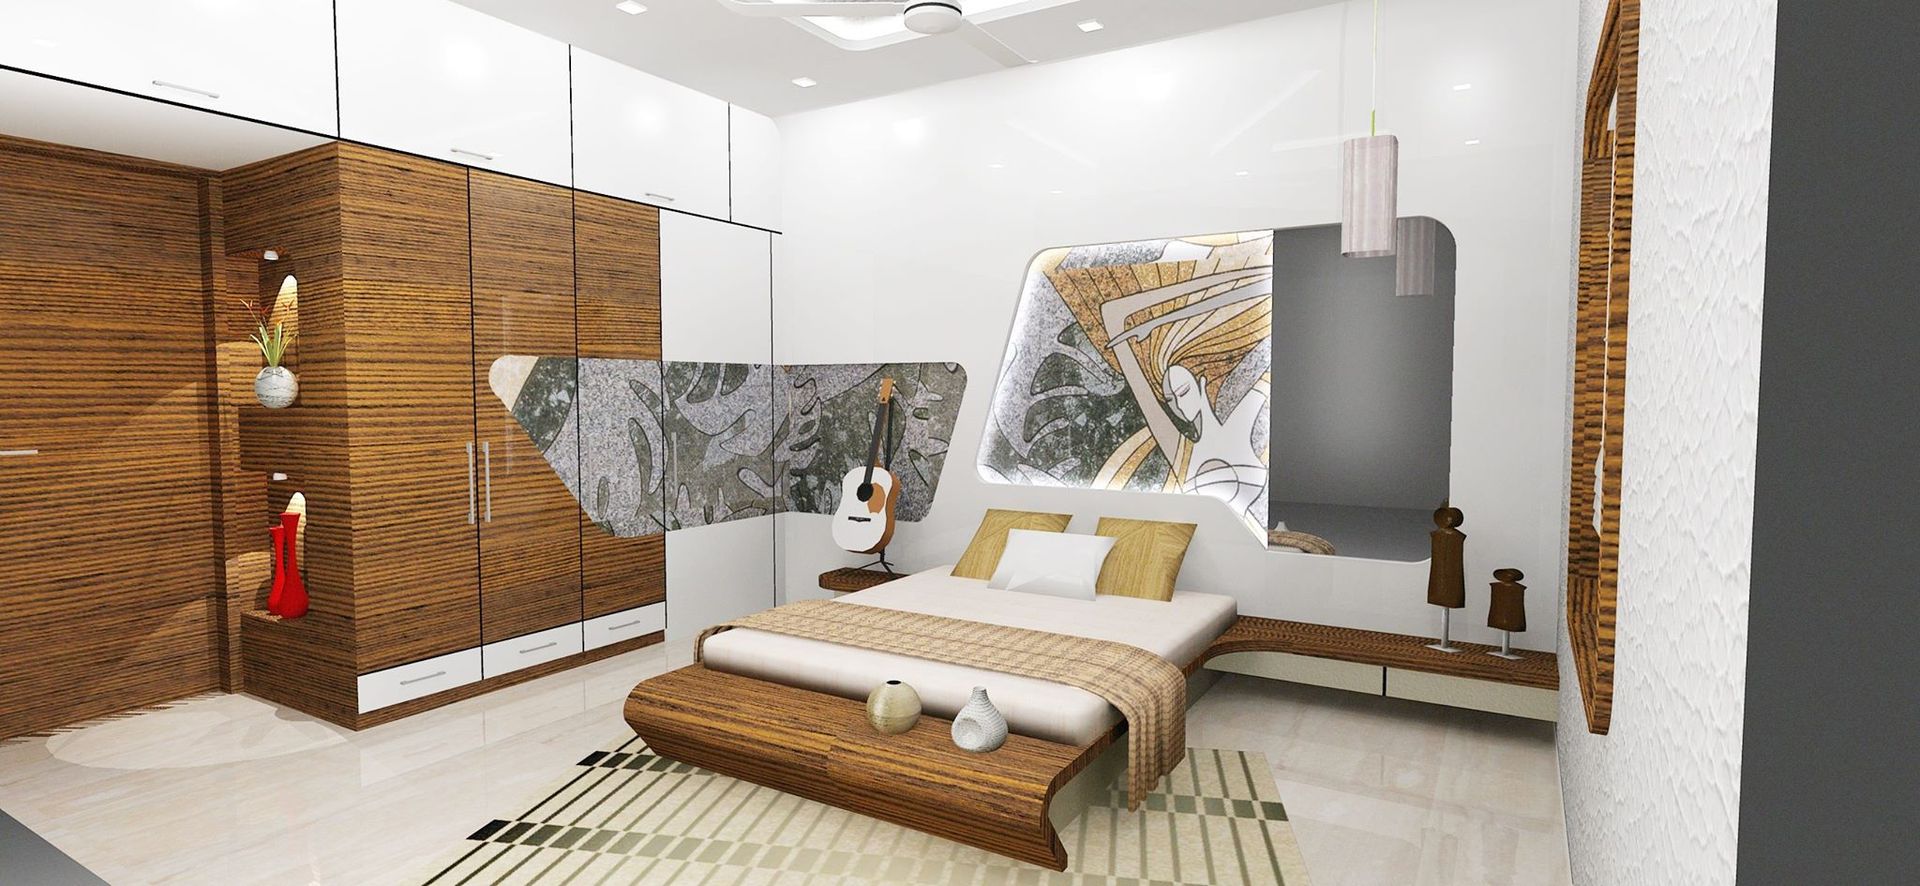 Bedroom Designs, Archsmith project consultant Archsmith project consultant غرفة نوم